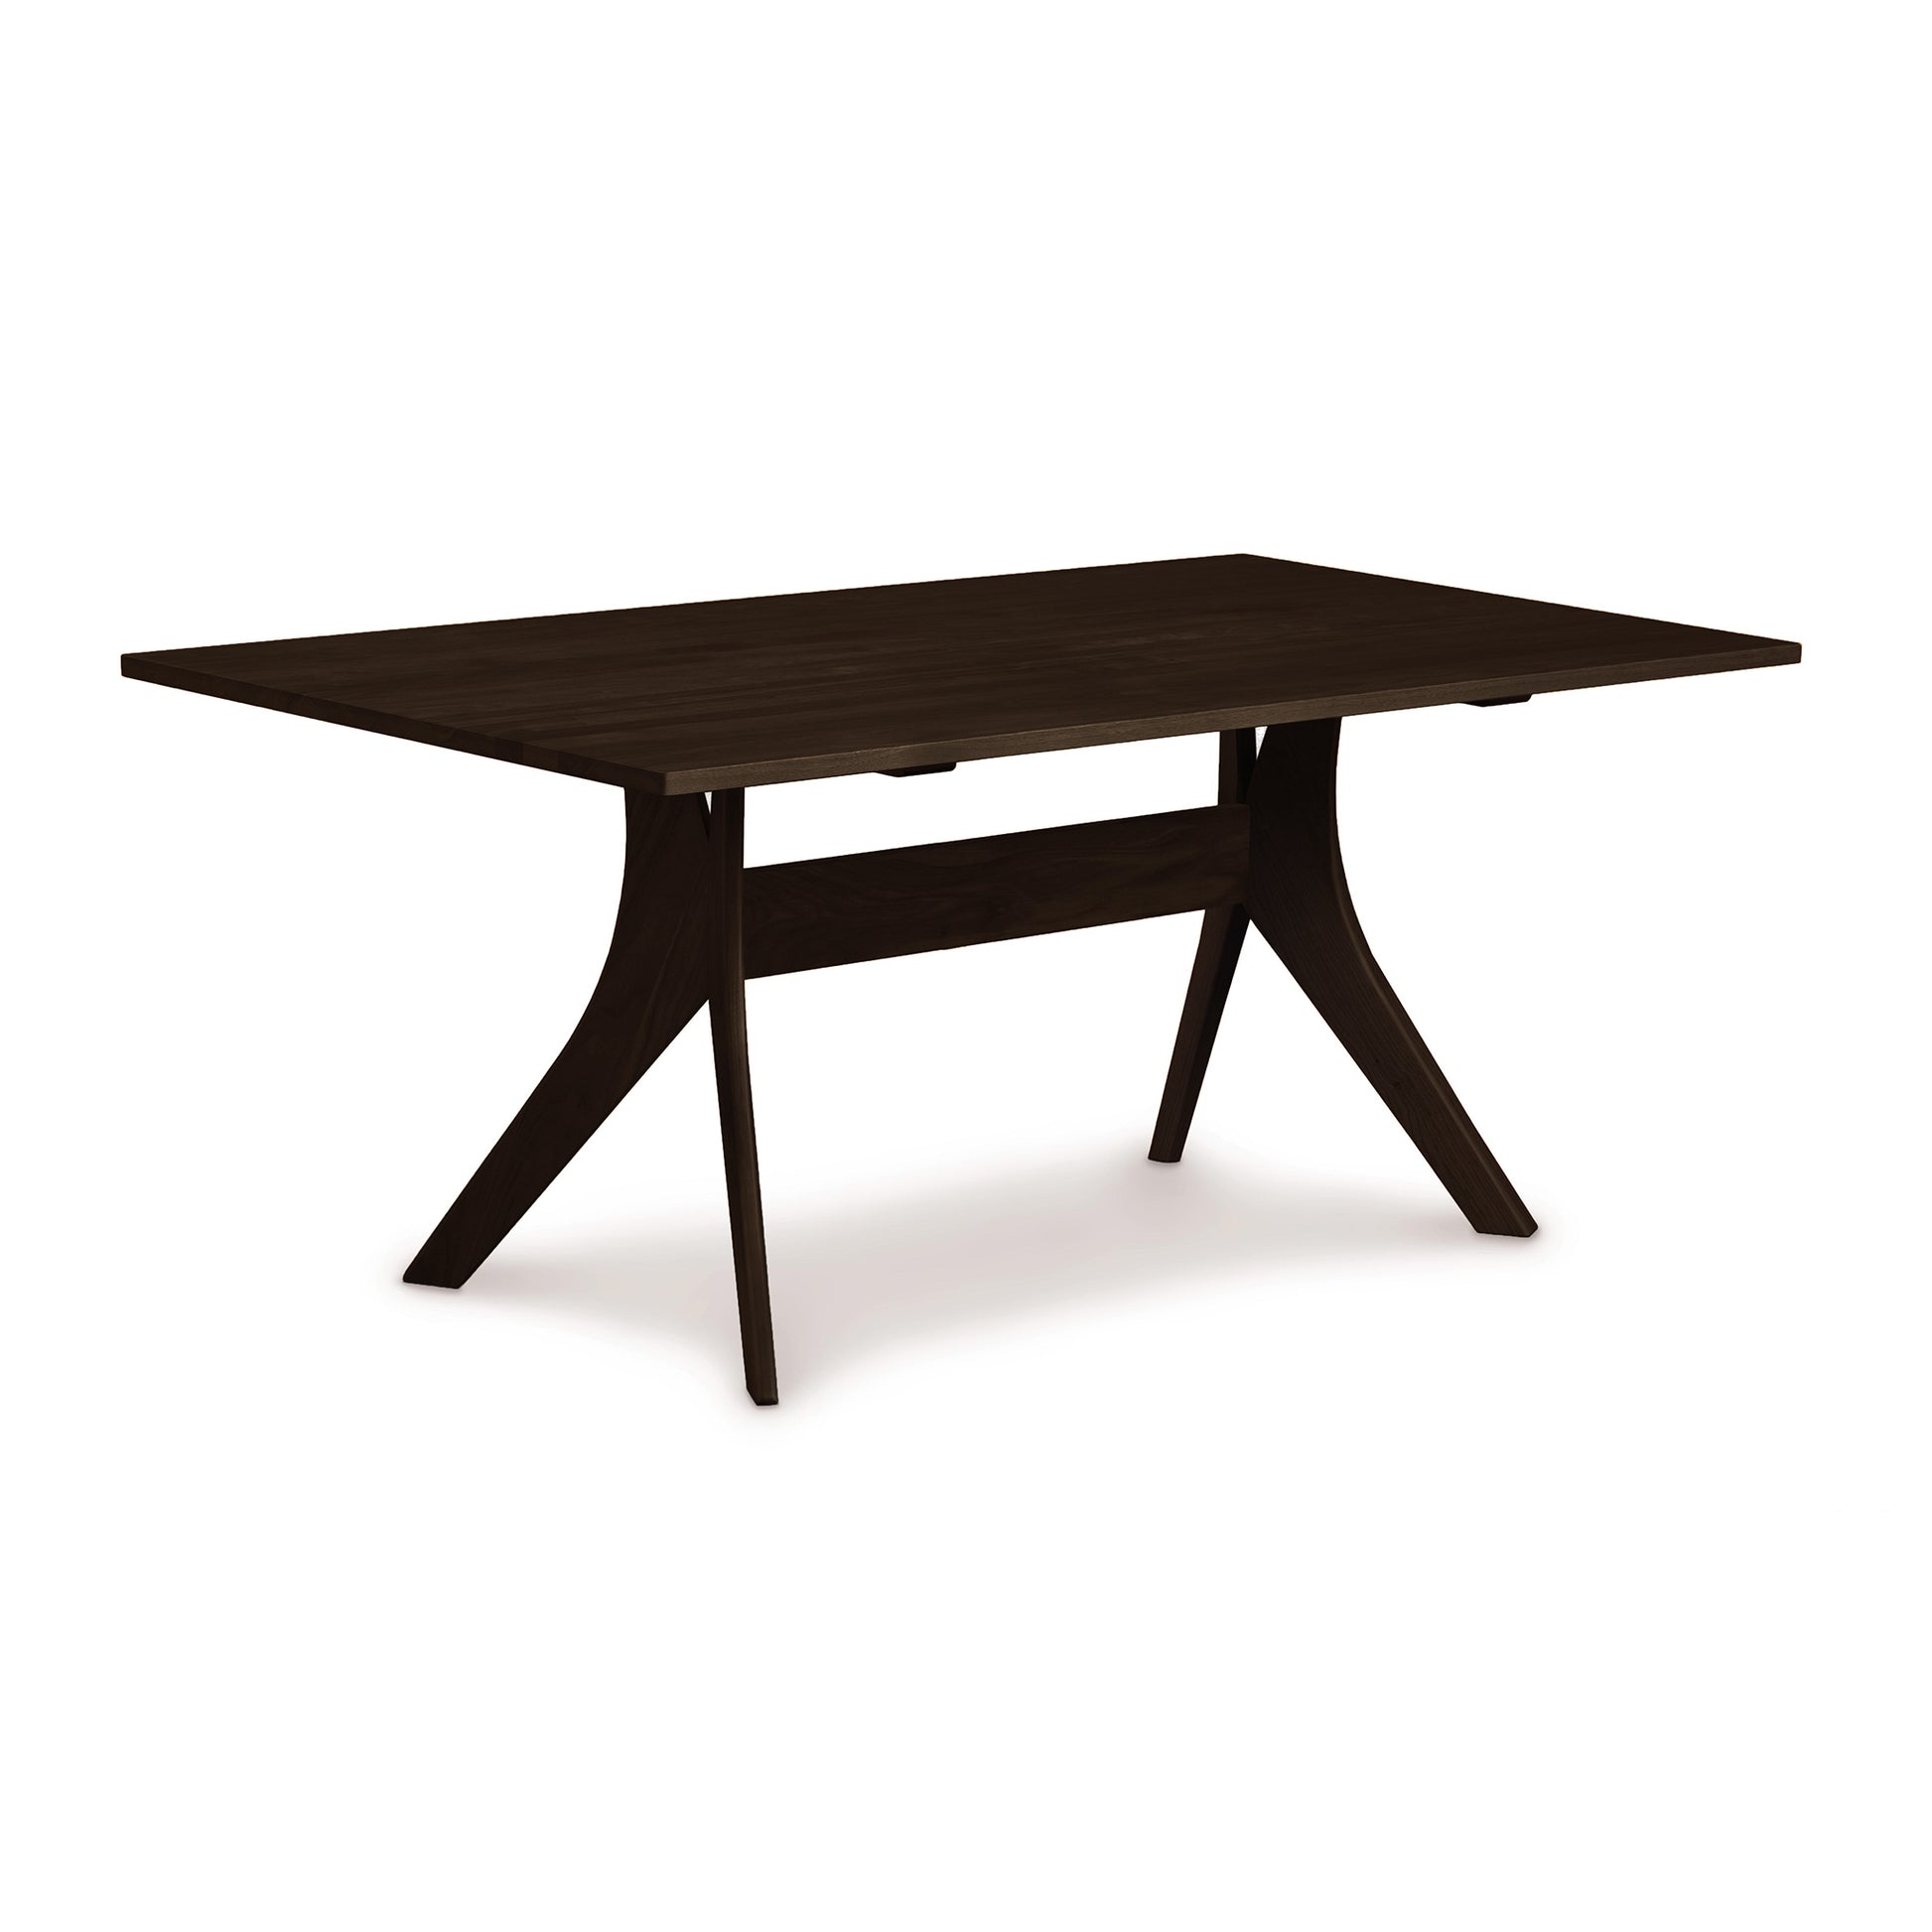 A Copeland Furniture Audrey Solid Top Dining Table with a dark finish and angled legs, isolated on a white background.